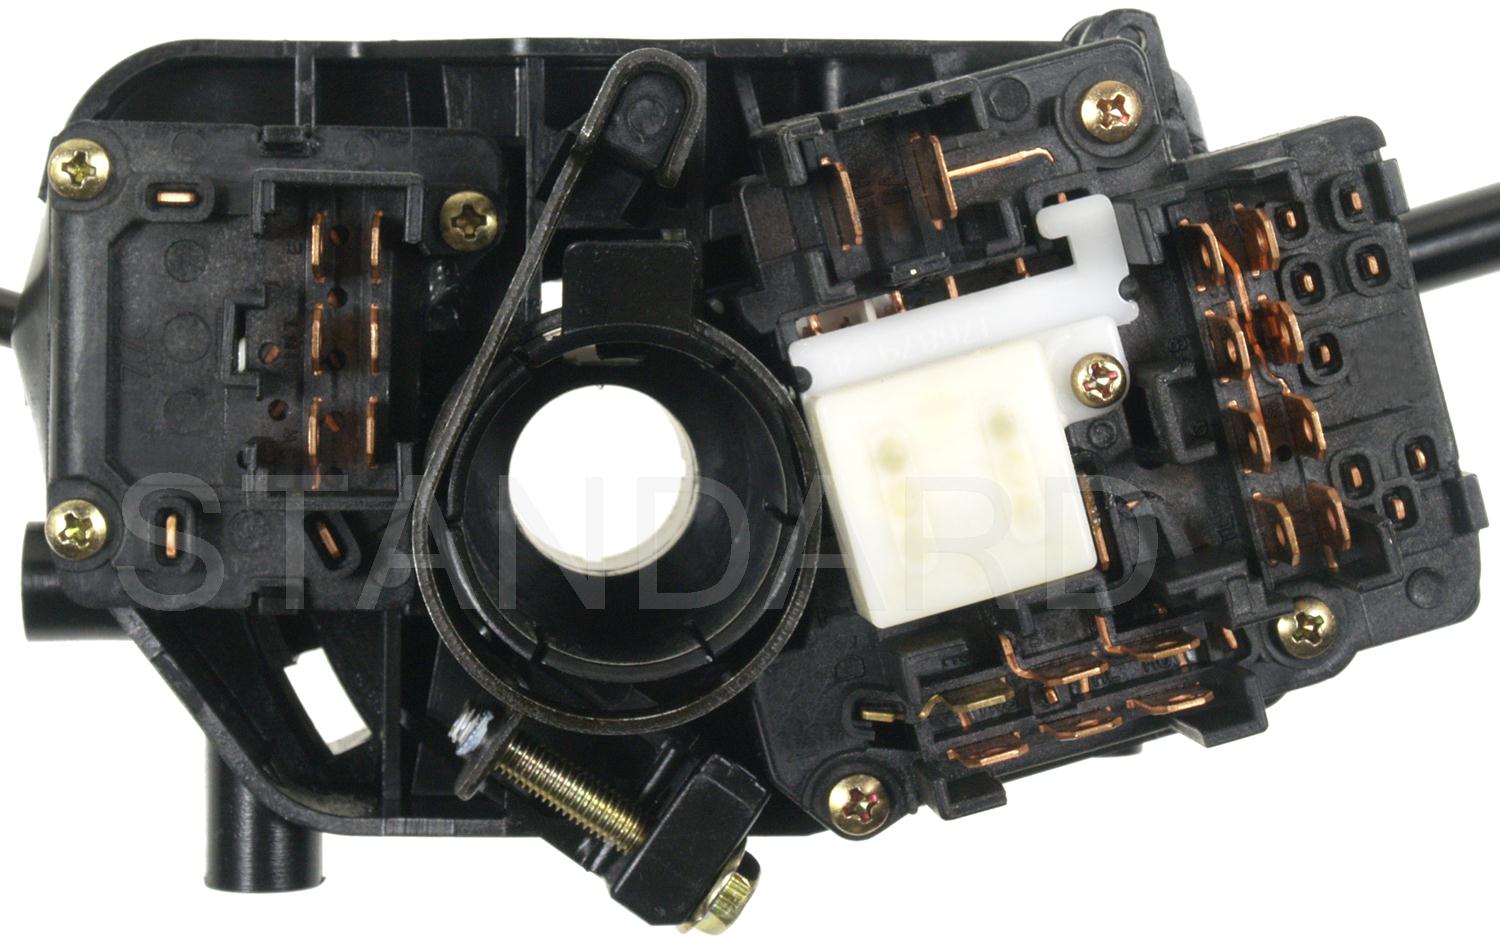 Show details for Standard Motor Products CBS1259 Standard Motor Products Cbs-1259 Combination Switch